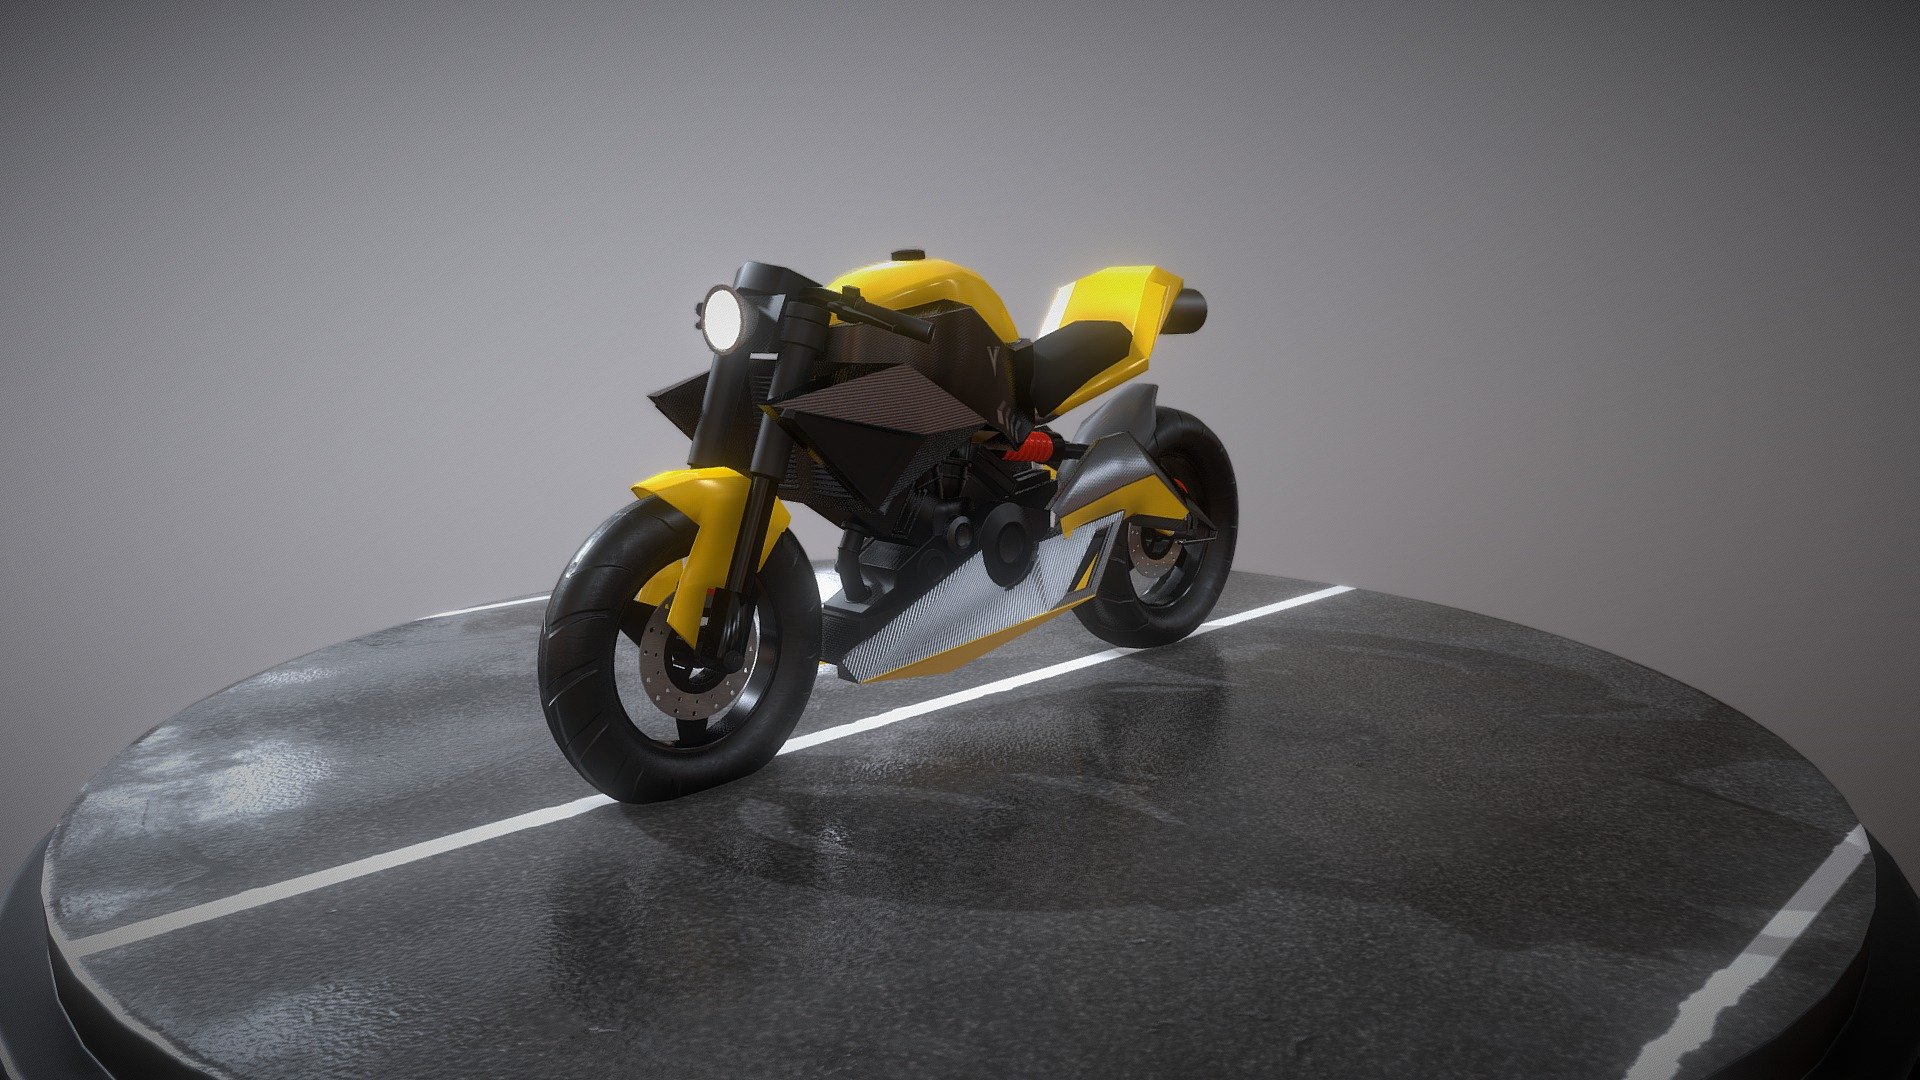 This bike is based on Concept.

Game Ready

Textured

With material Shaders

Rig Ready - Conceptbike - 3D model by savi_kohard 3d model